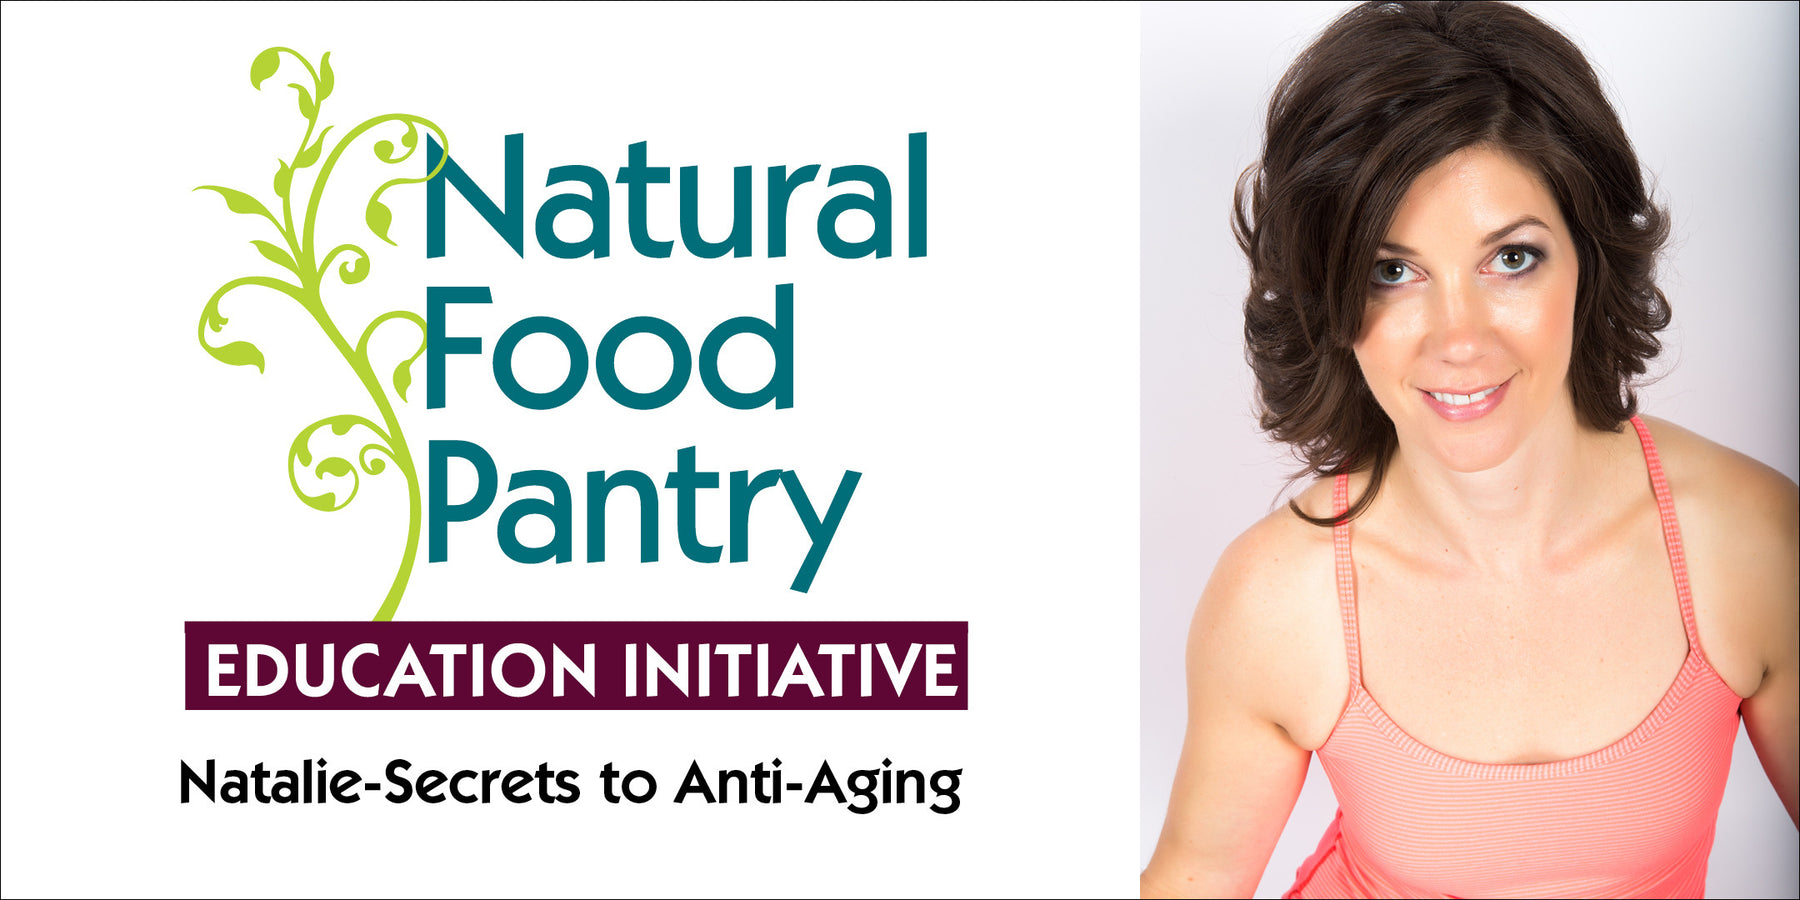 JULY 25 & 27: THE SECRETS TO ANTI-AGING